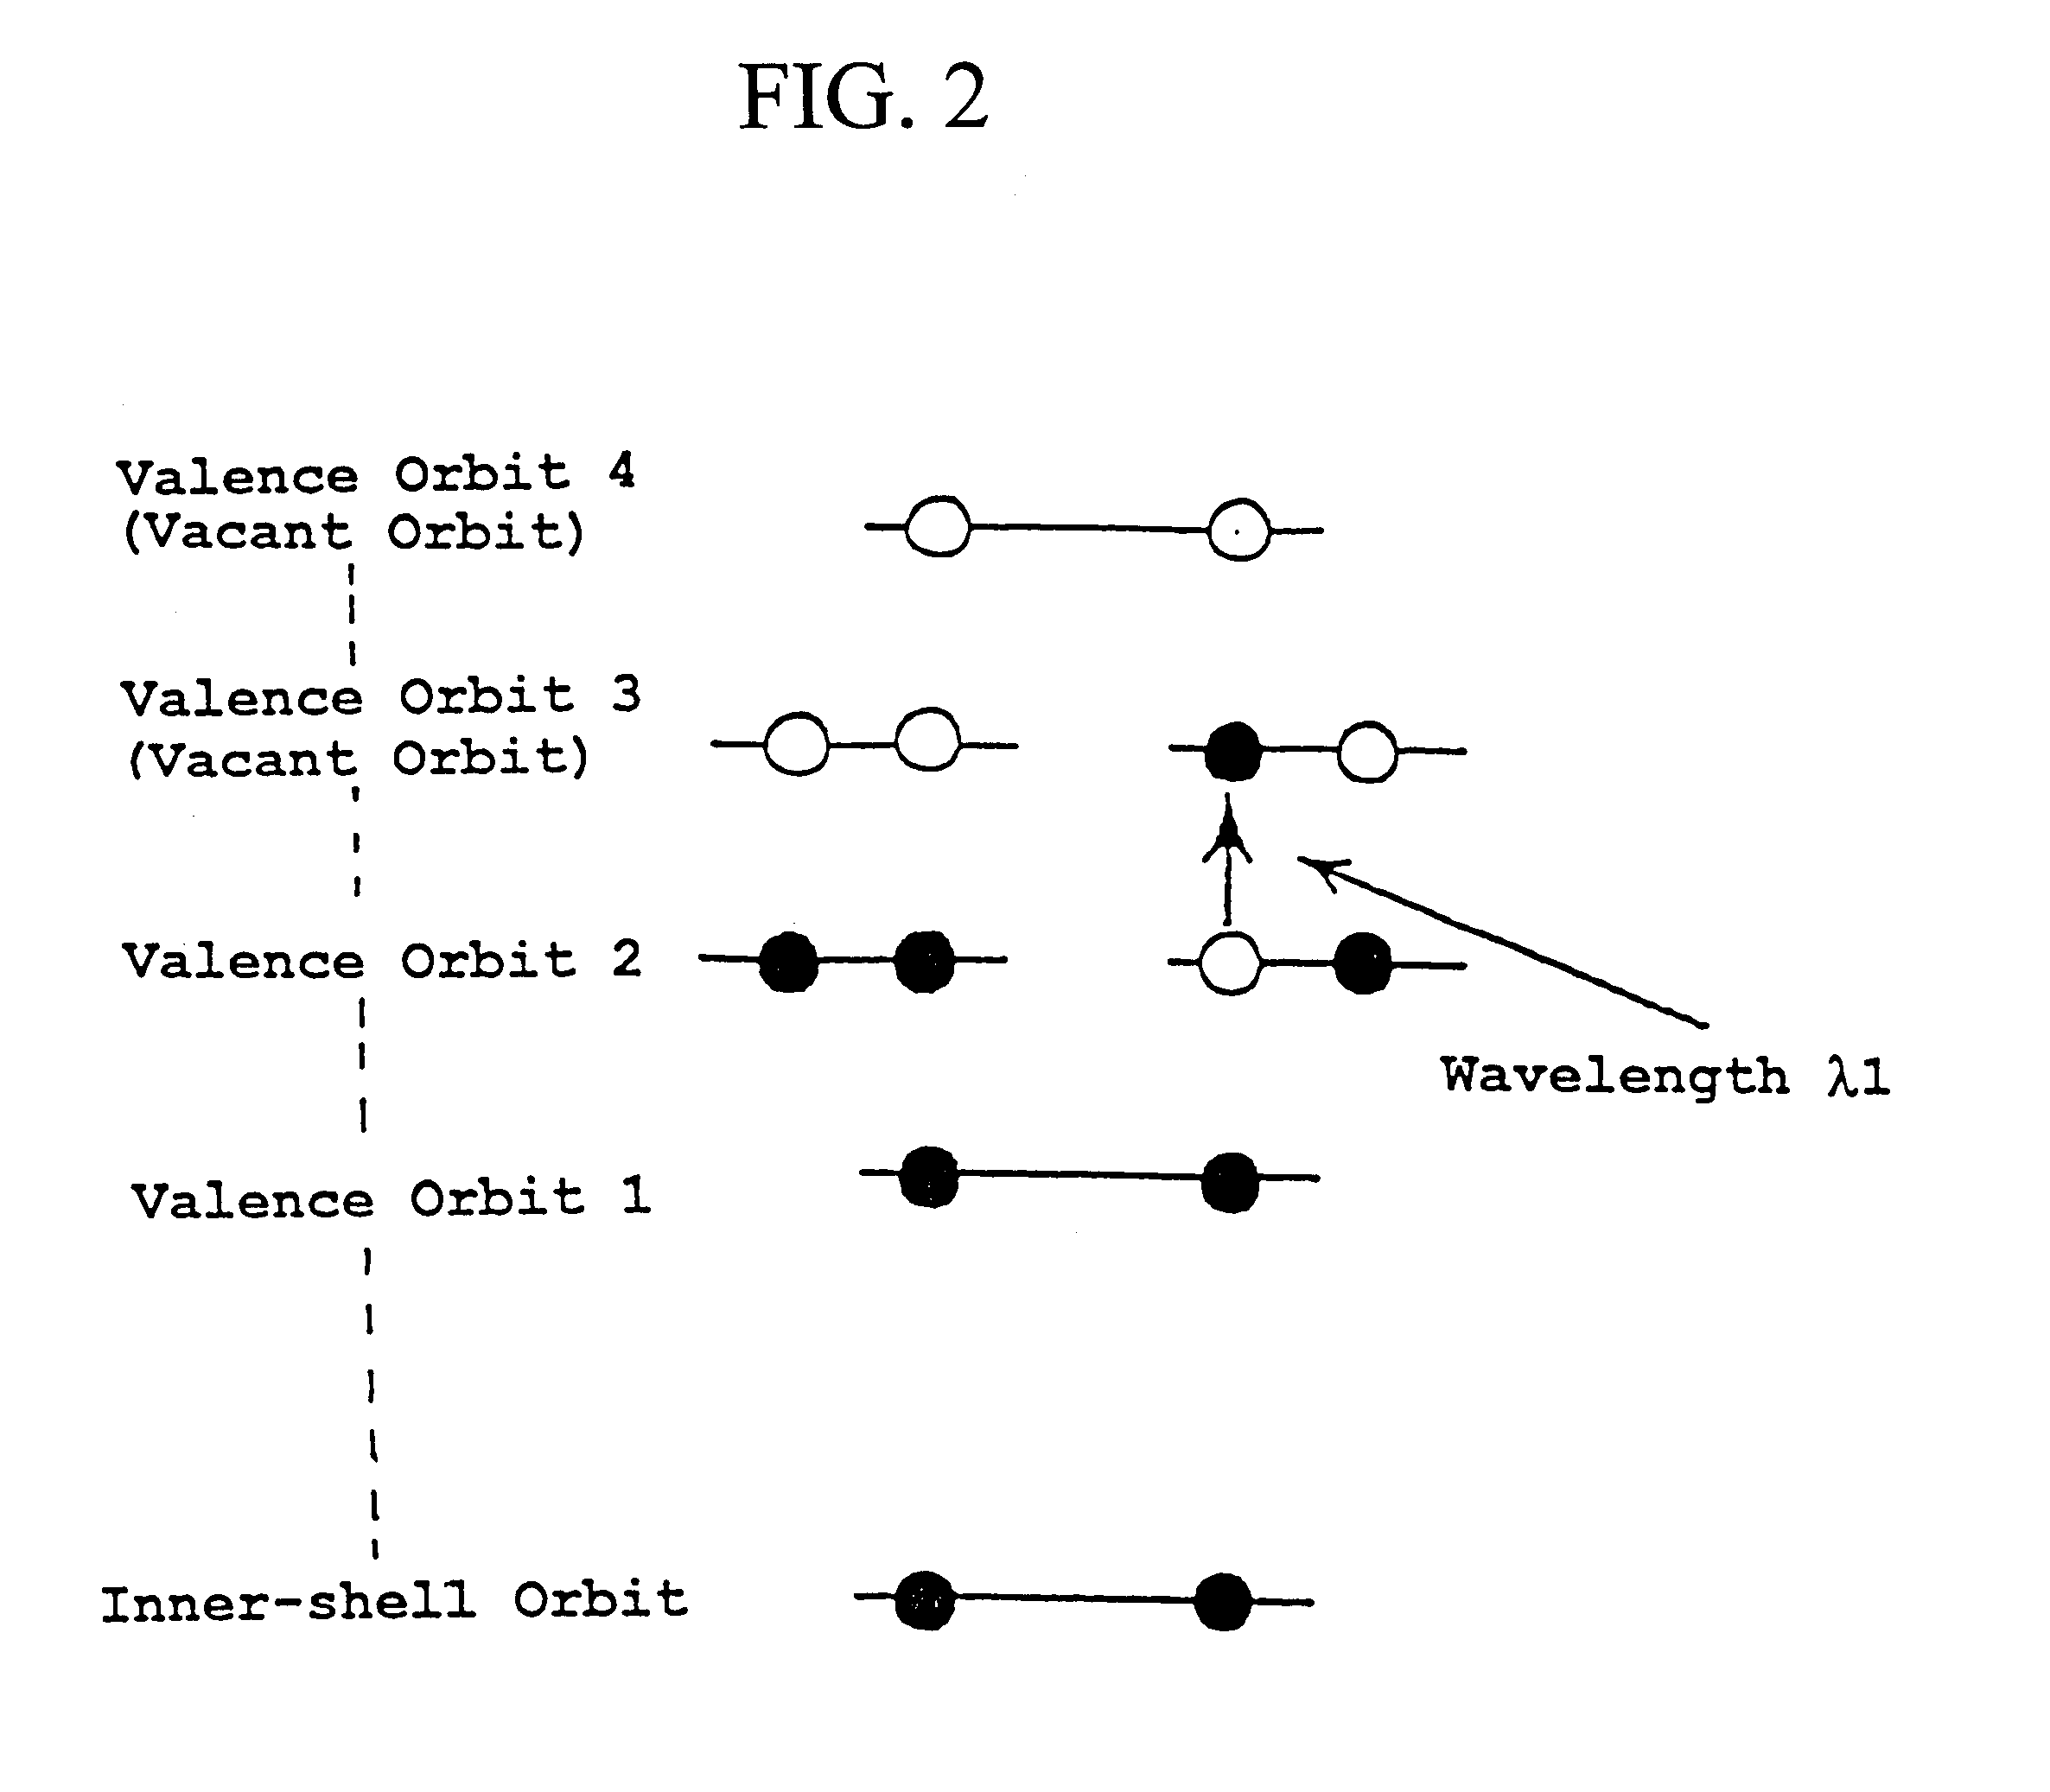 Super-resolution microscope system and method for illumination